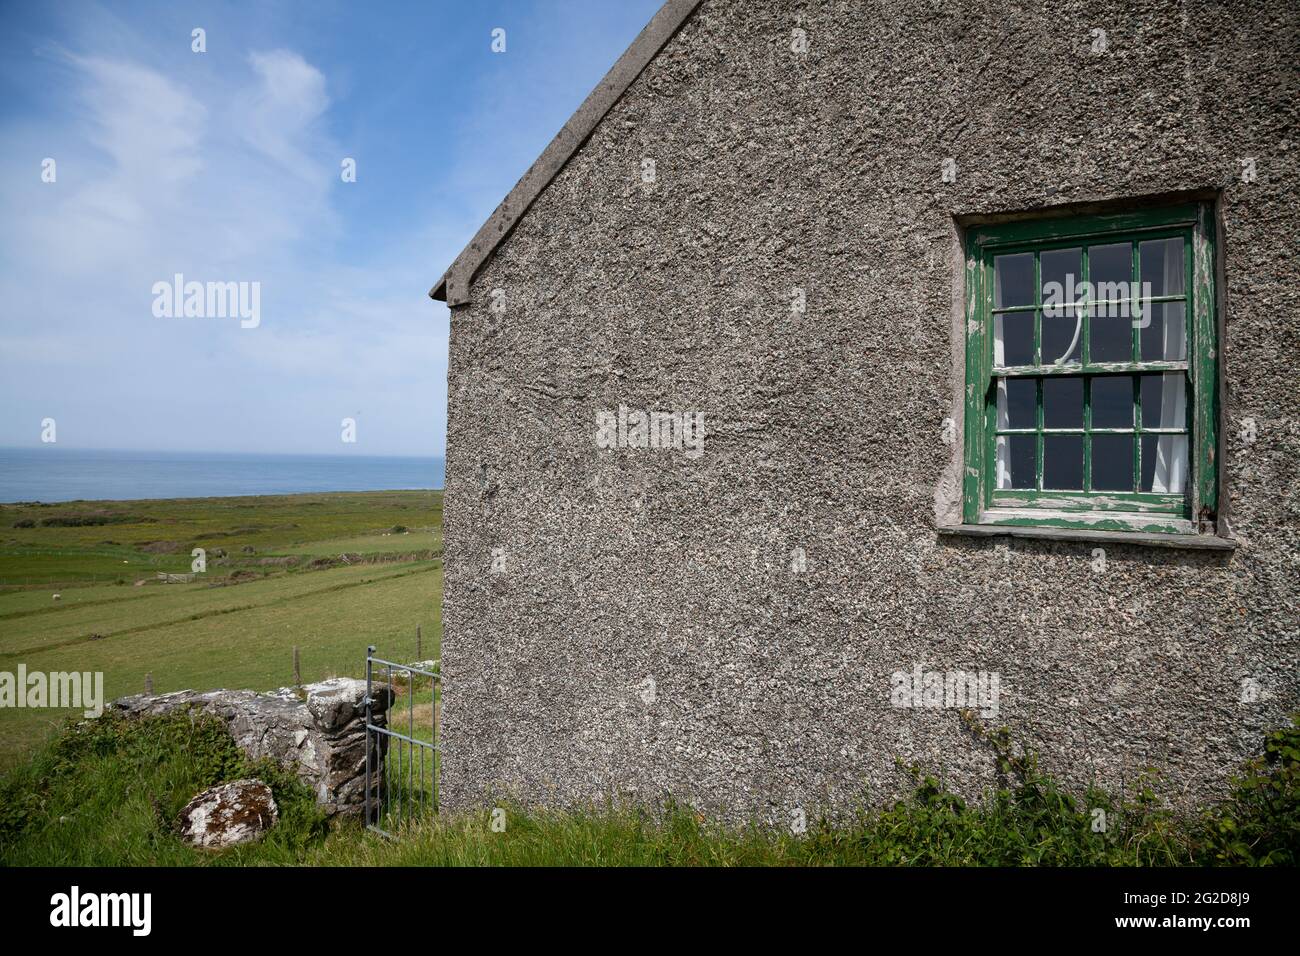 The gable end of the former schoolhouse on Ynys Enlli / Bardsey Island taken on a sunny day with victorian sash window with flaking green paint Stock Photo